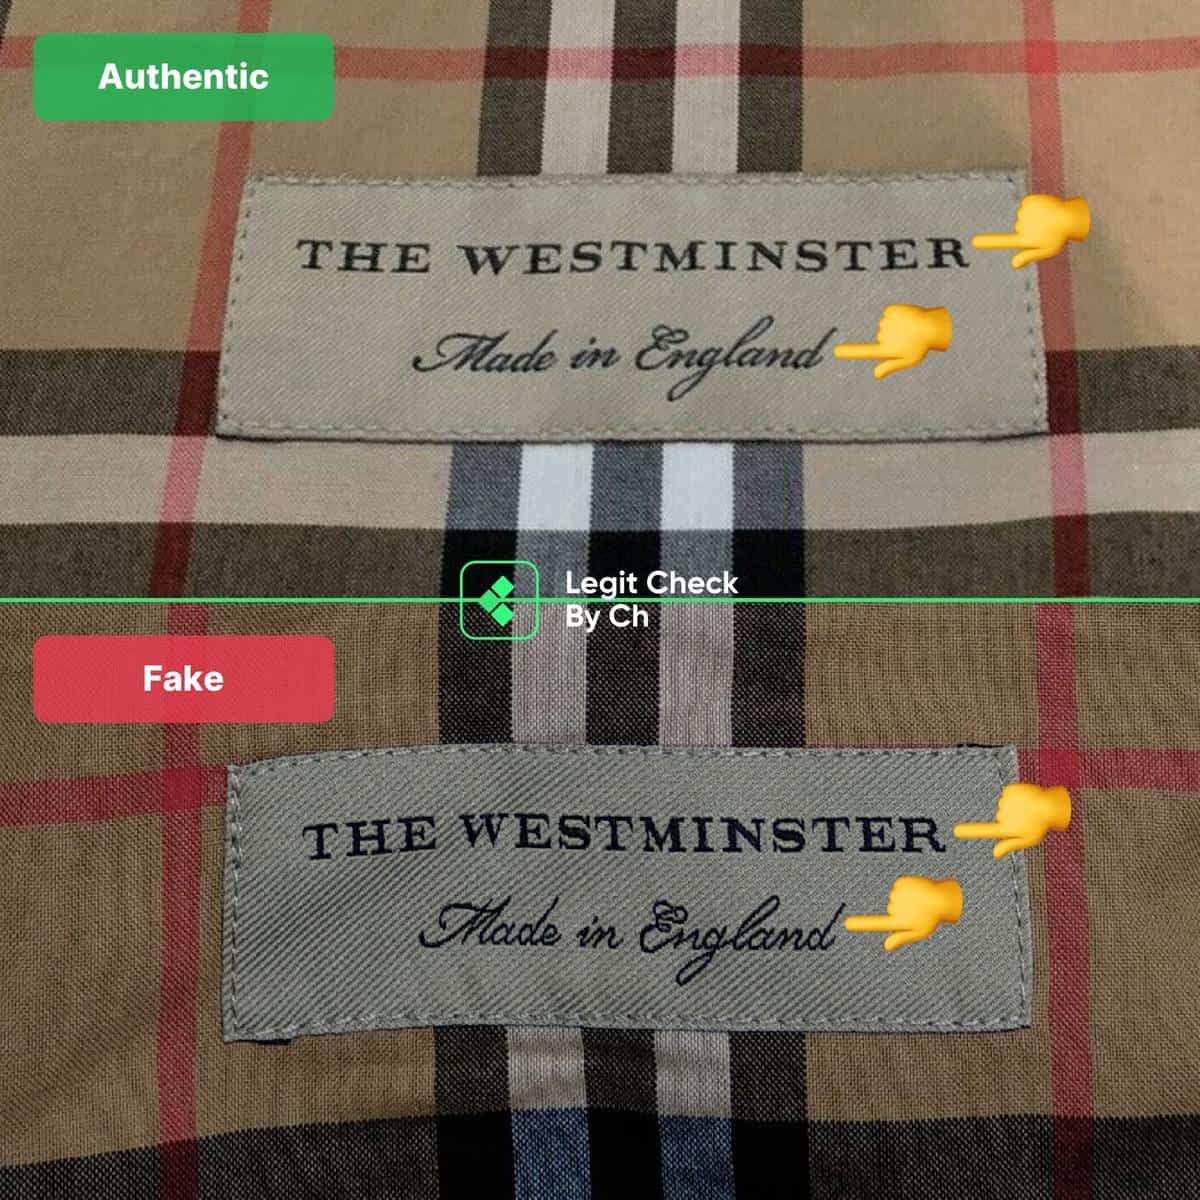 How To Spot Fake Burberry Coats In 2021 - Fake Real Burberry Trench Coat Guide - By Ch